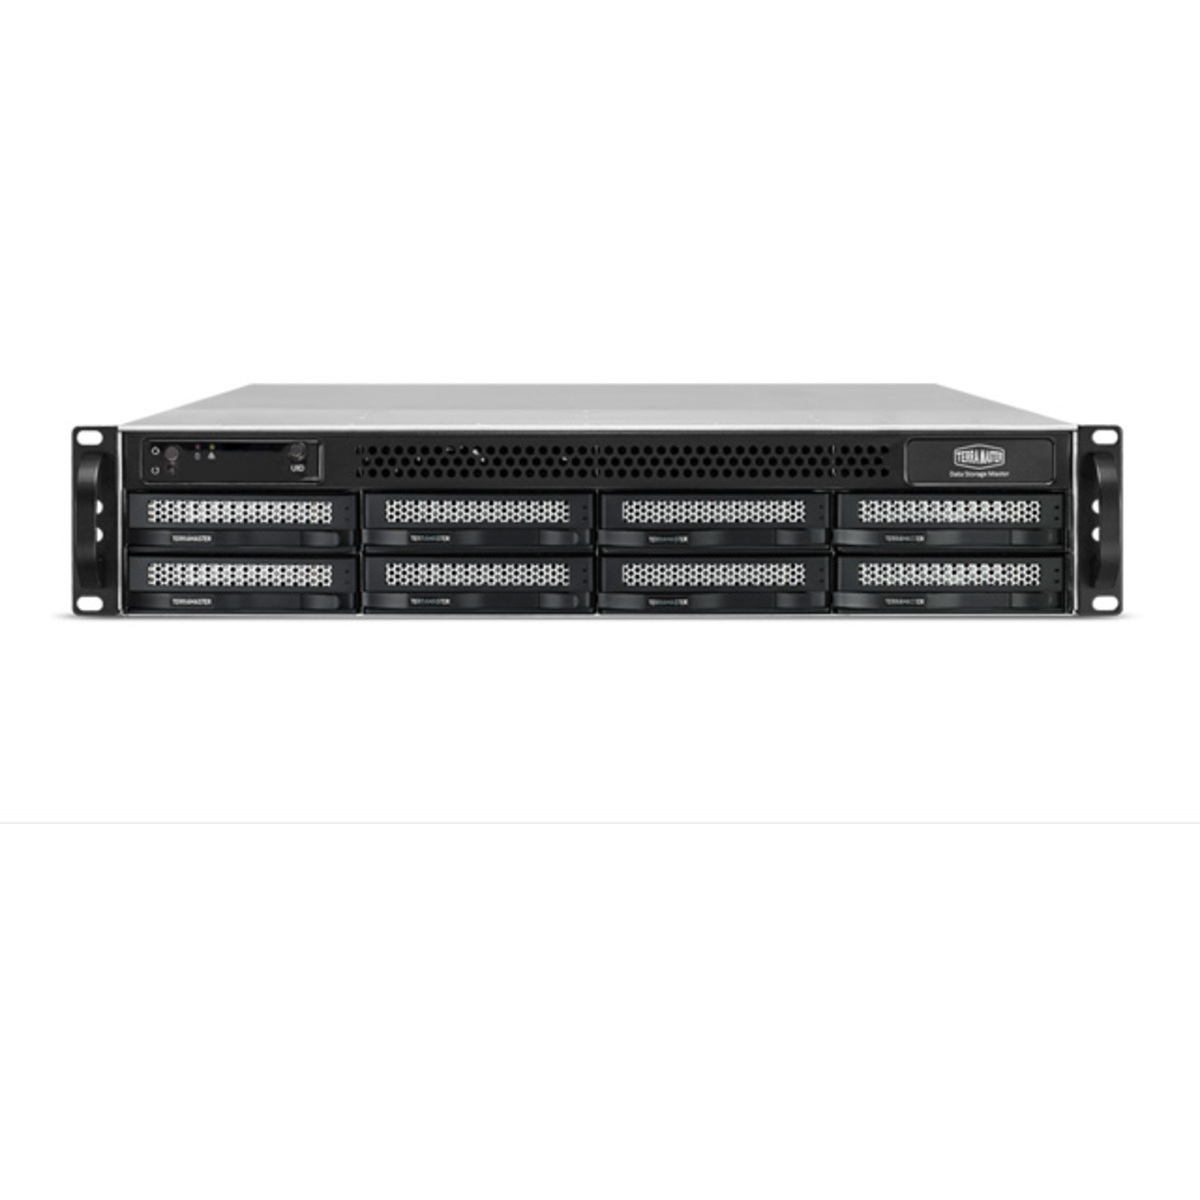 TerraMaster U8-423 RackMount 8-Bay Multimedia / Power User / Business NAS - Network Attached Storage Device Burn-In Tested Configurations - FREE RAM UPGRADE U8-423